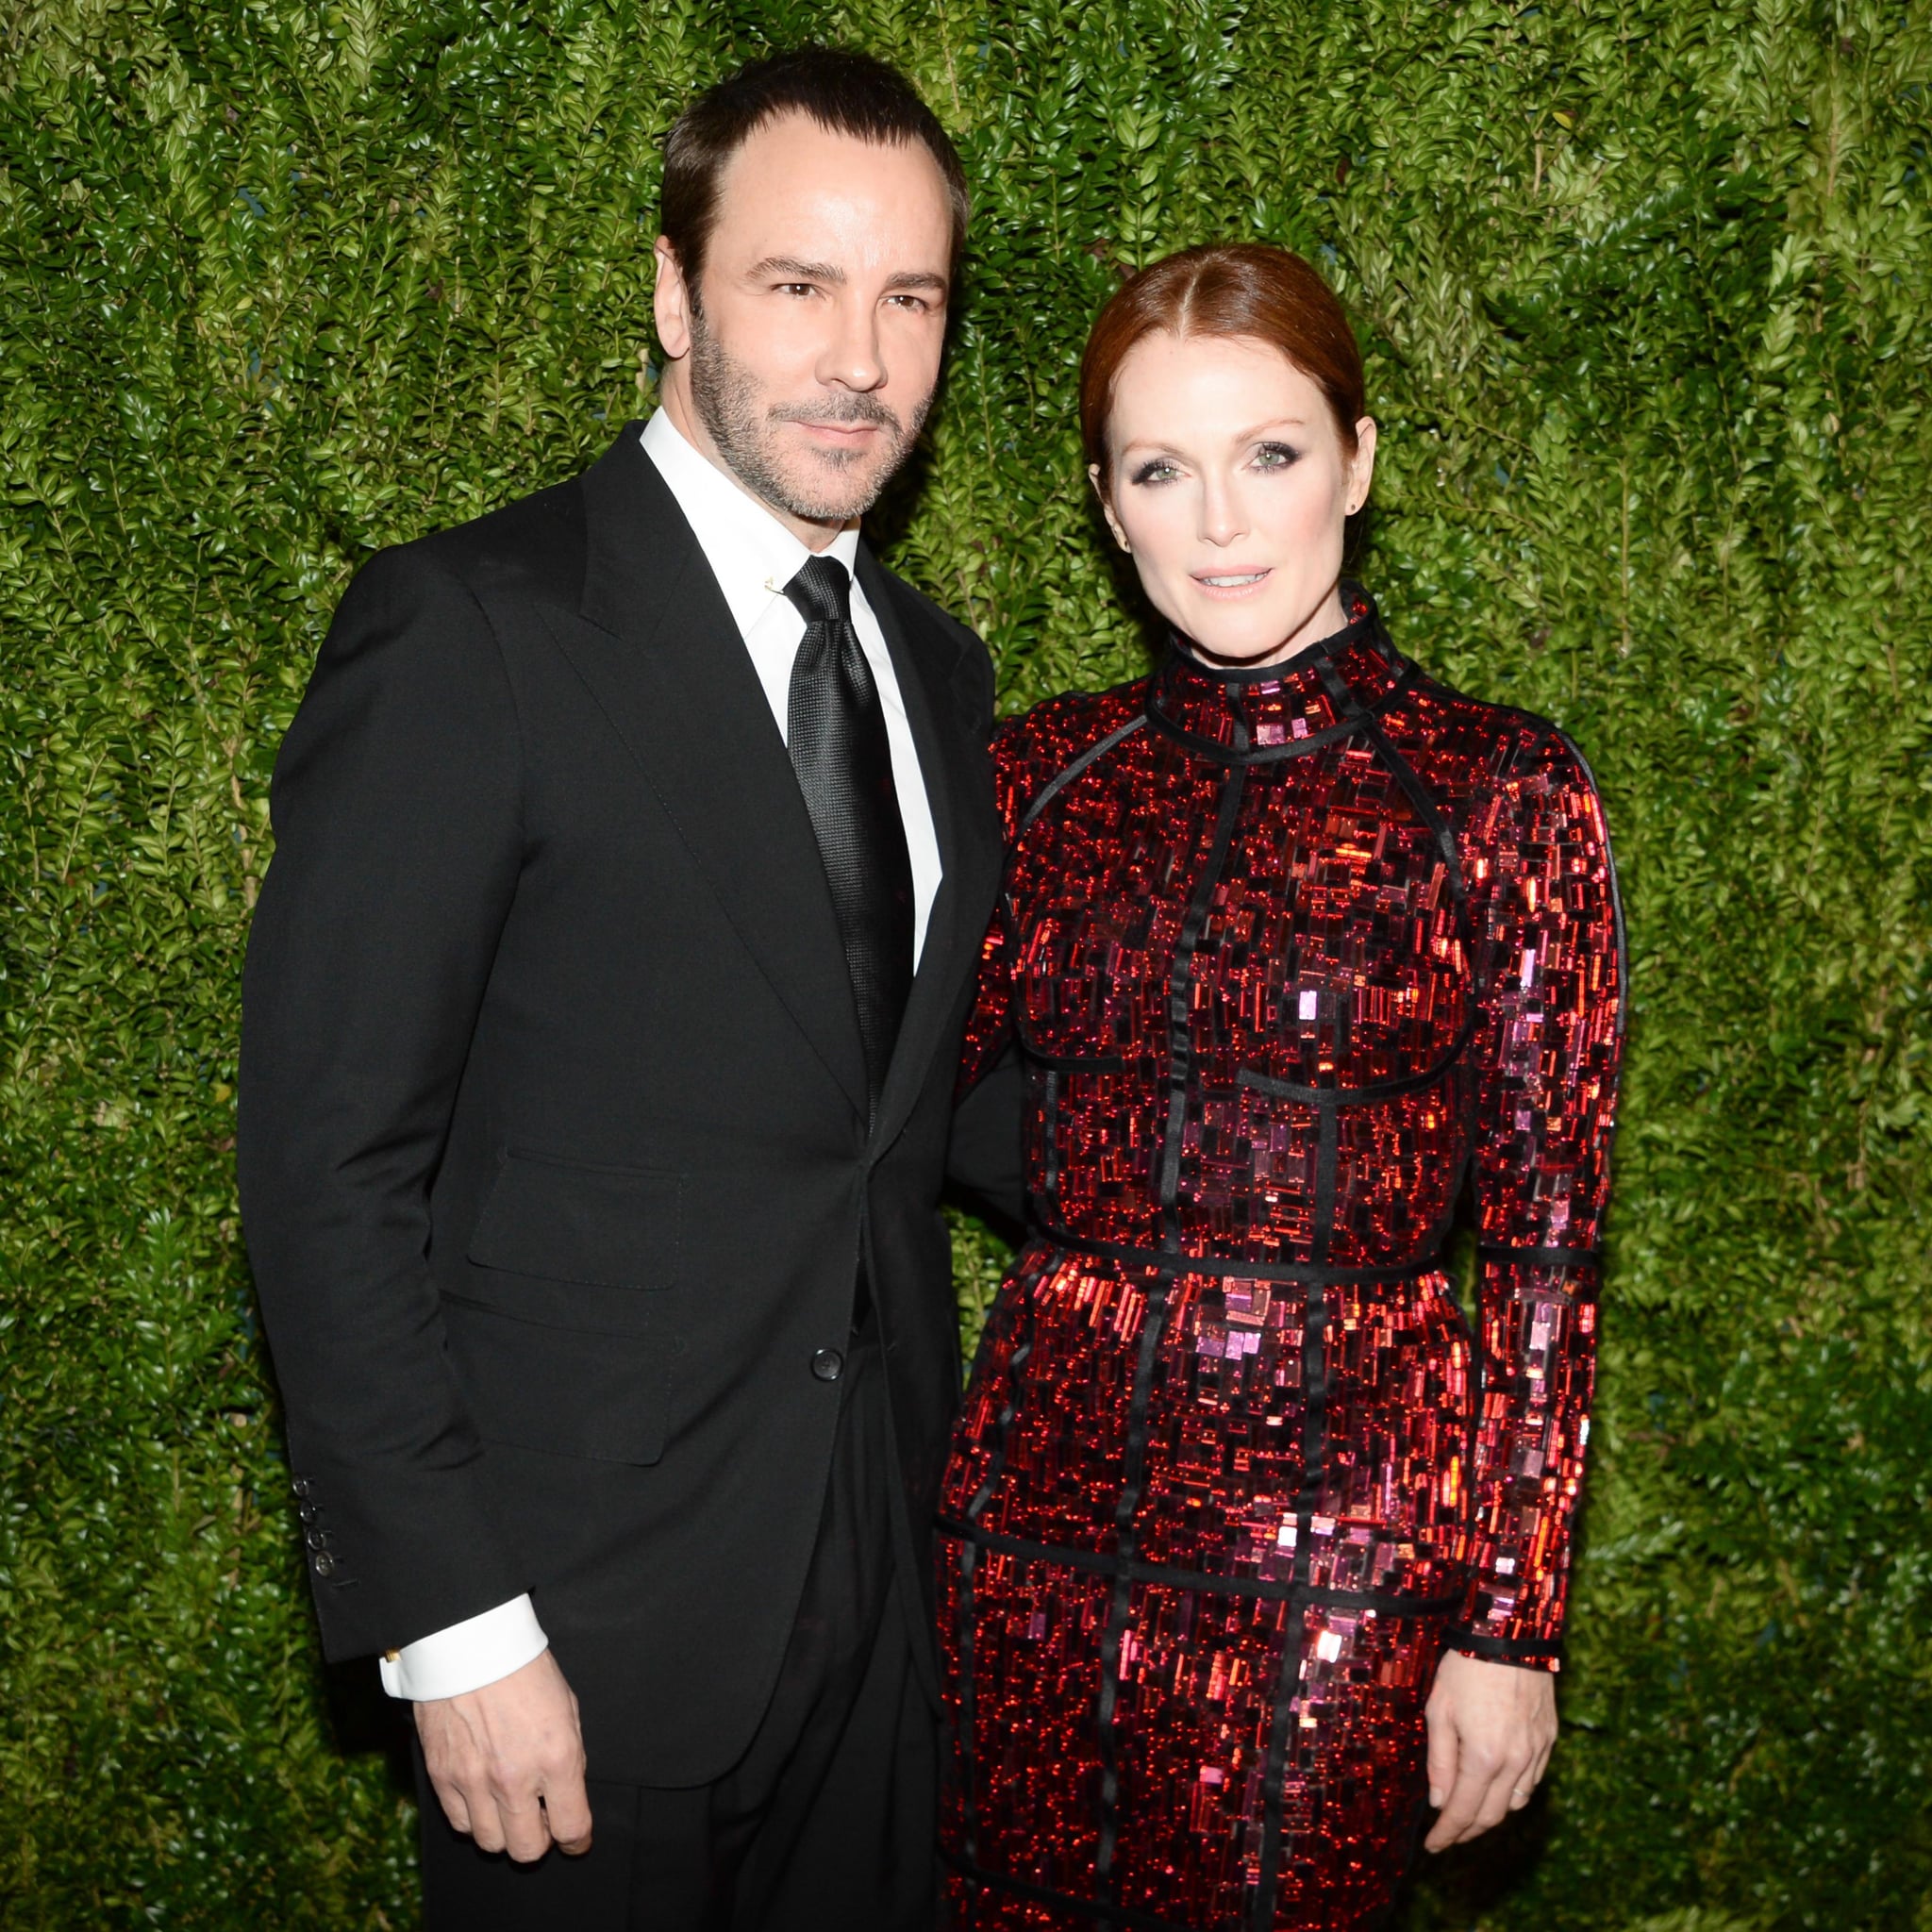 Tom Ford Red Carpet Style Interview | POPSUGAR Fashion